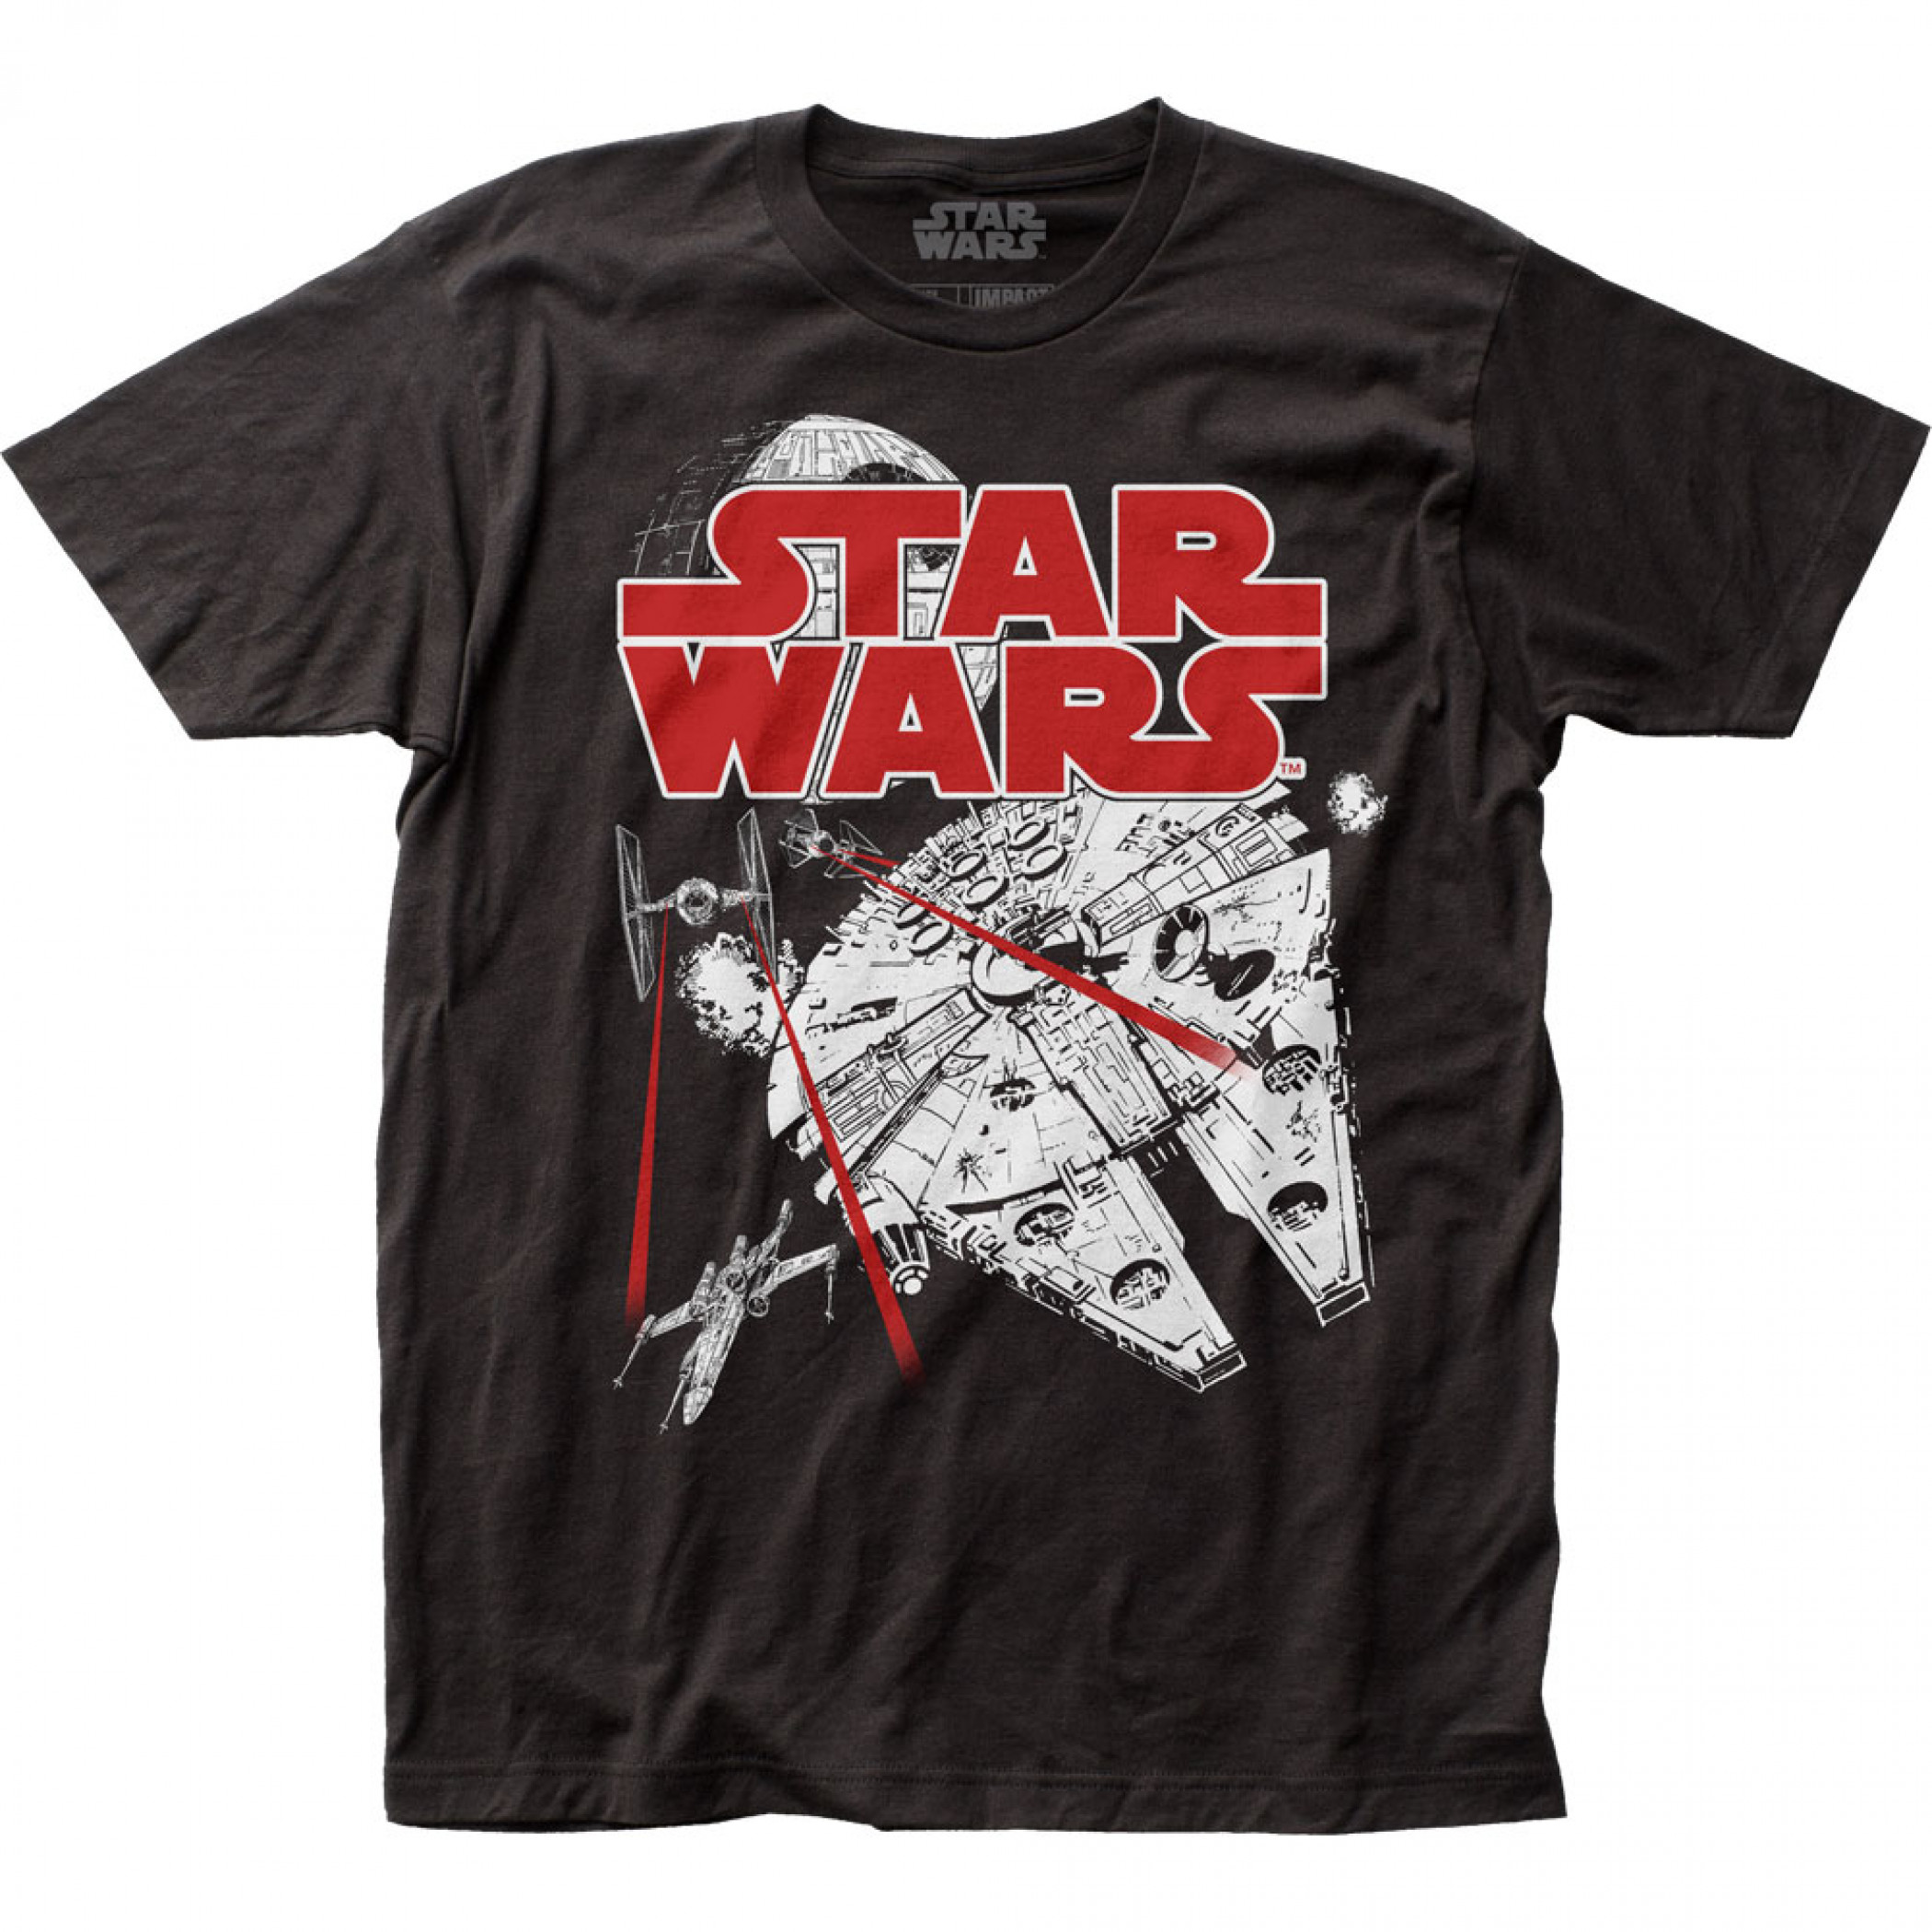 Star Wars Space Fight T-Shirt